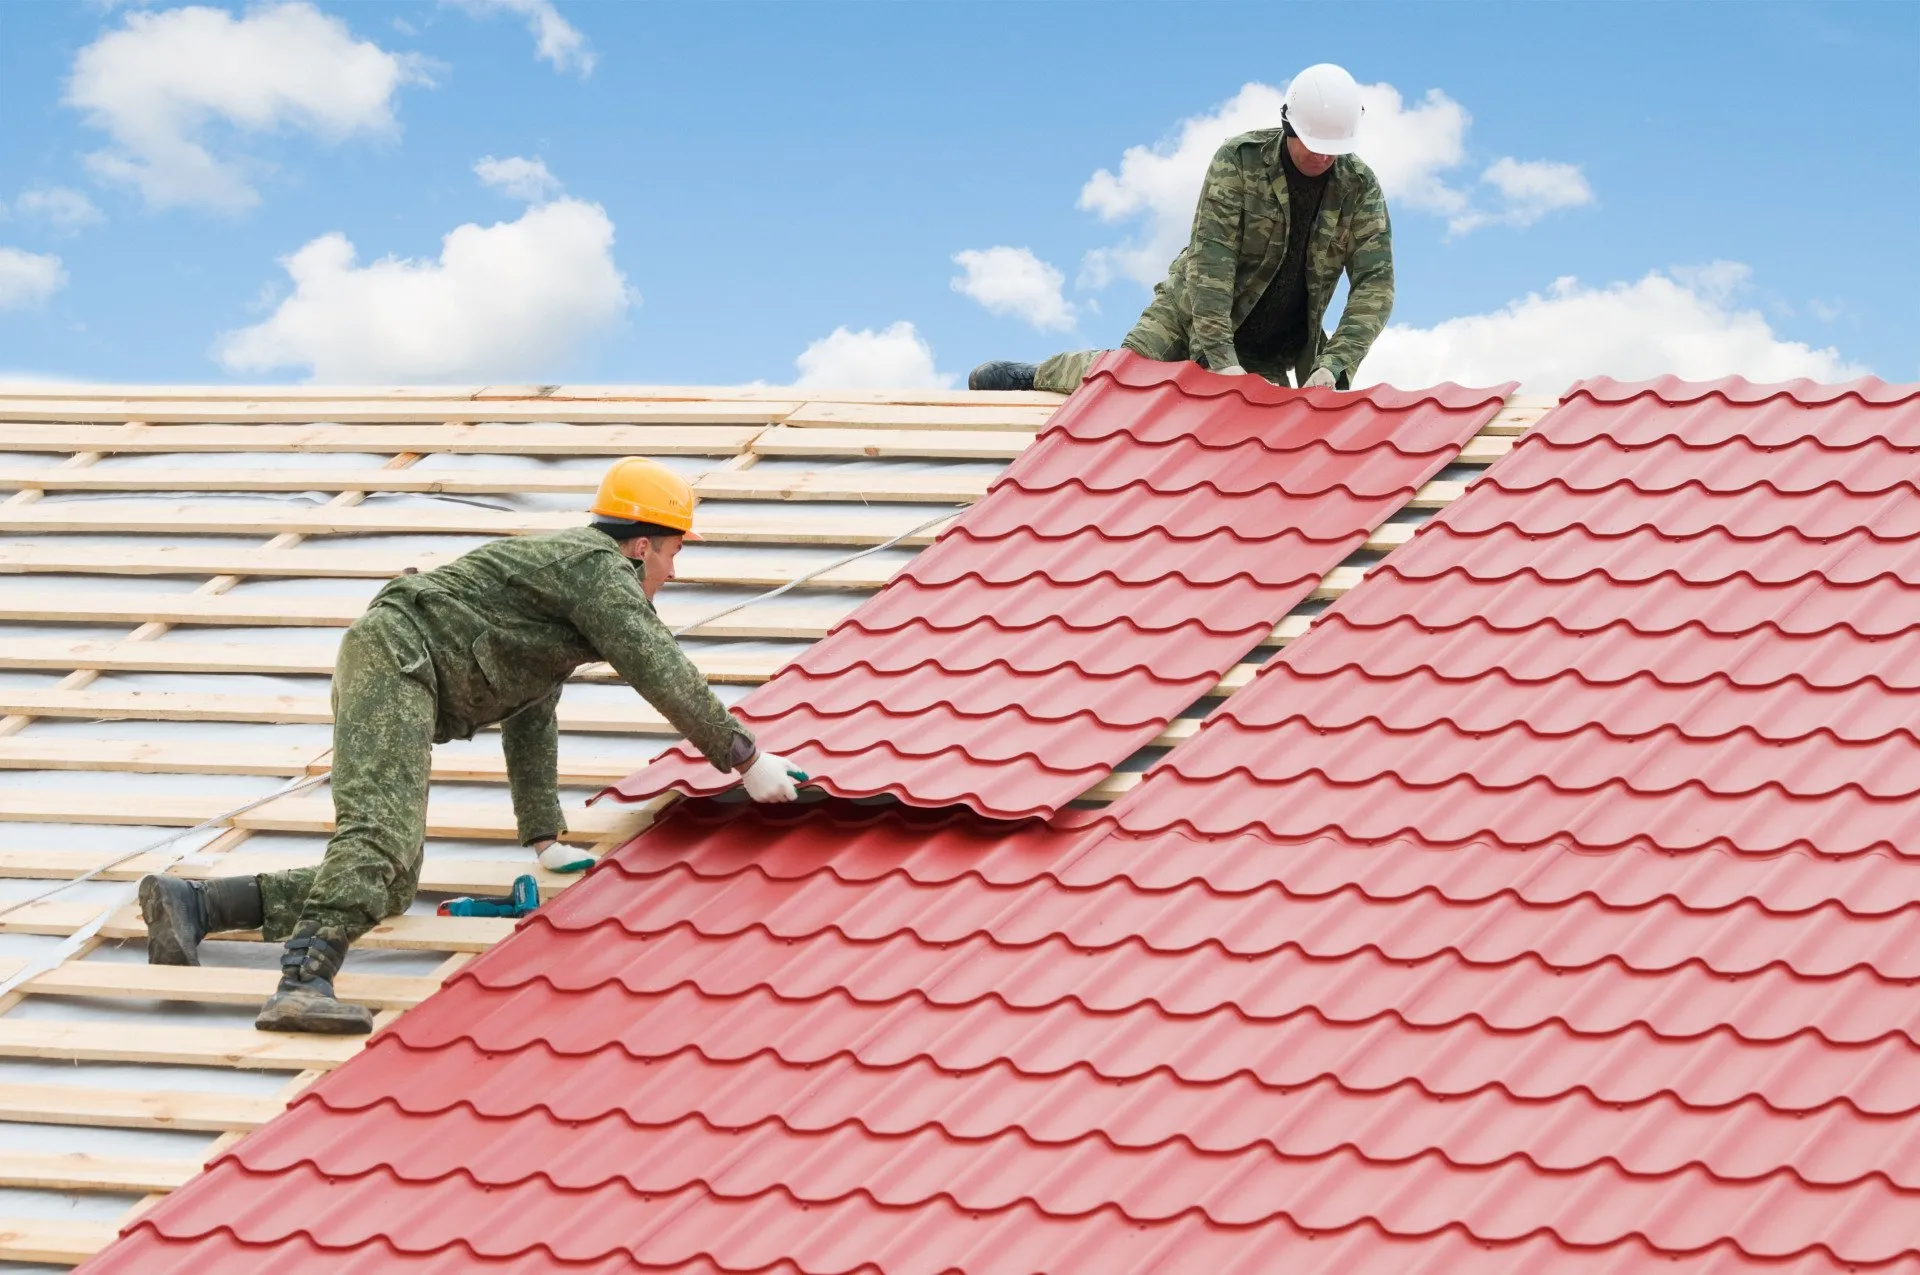 5 Reasons to Install a Metal Roof